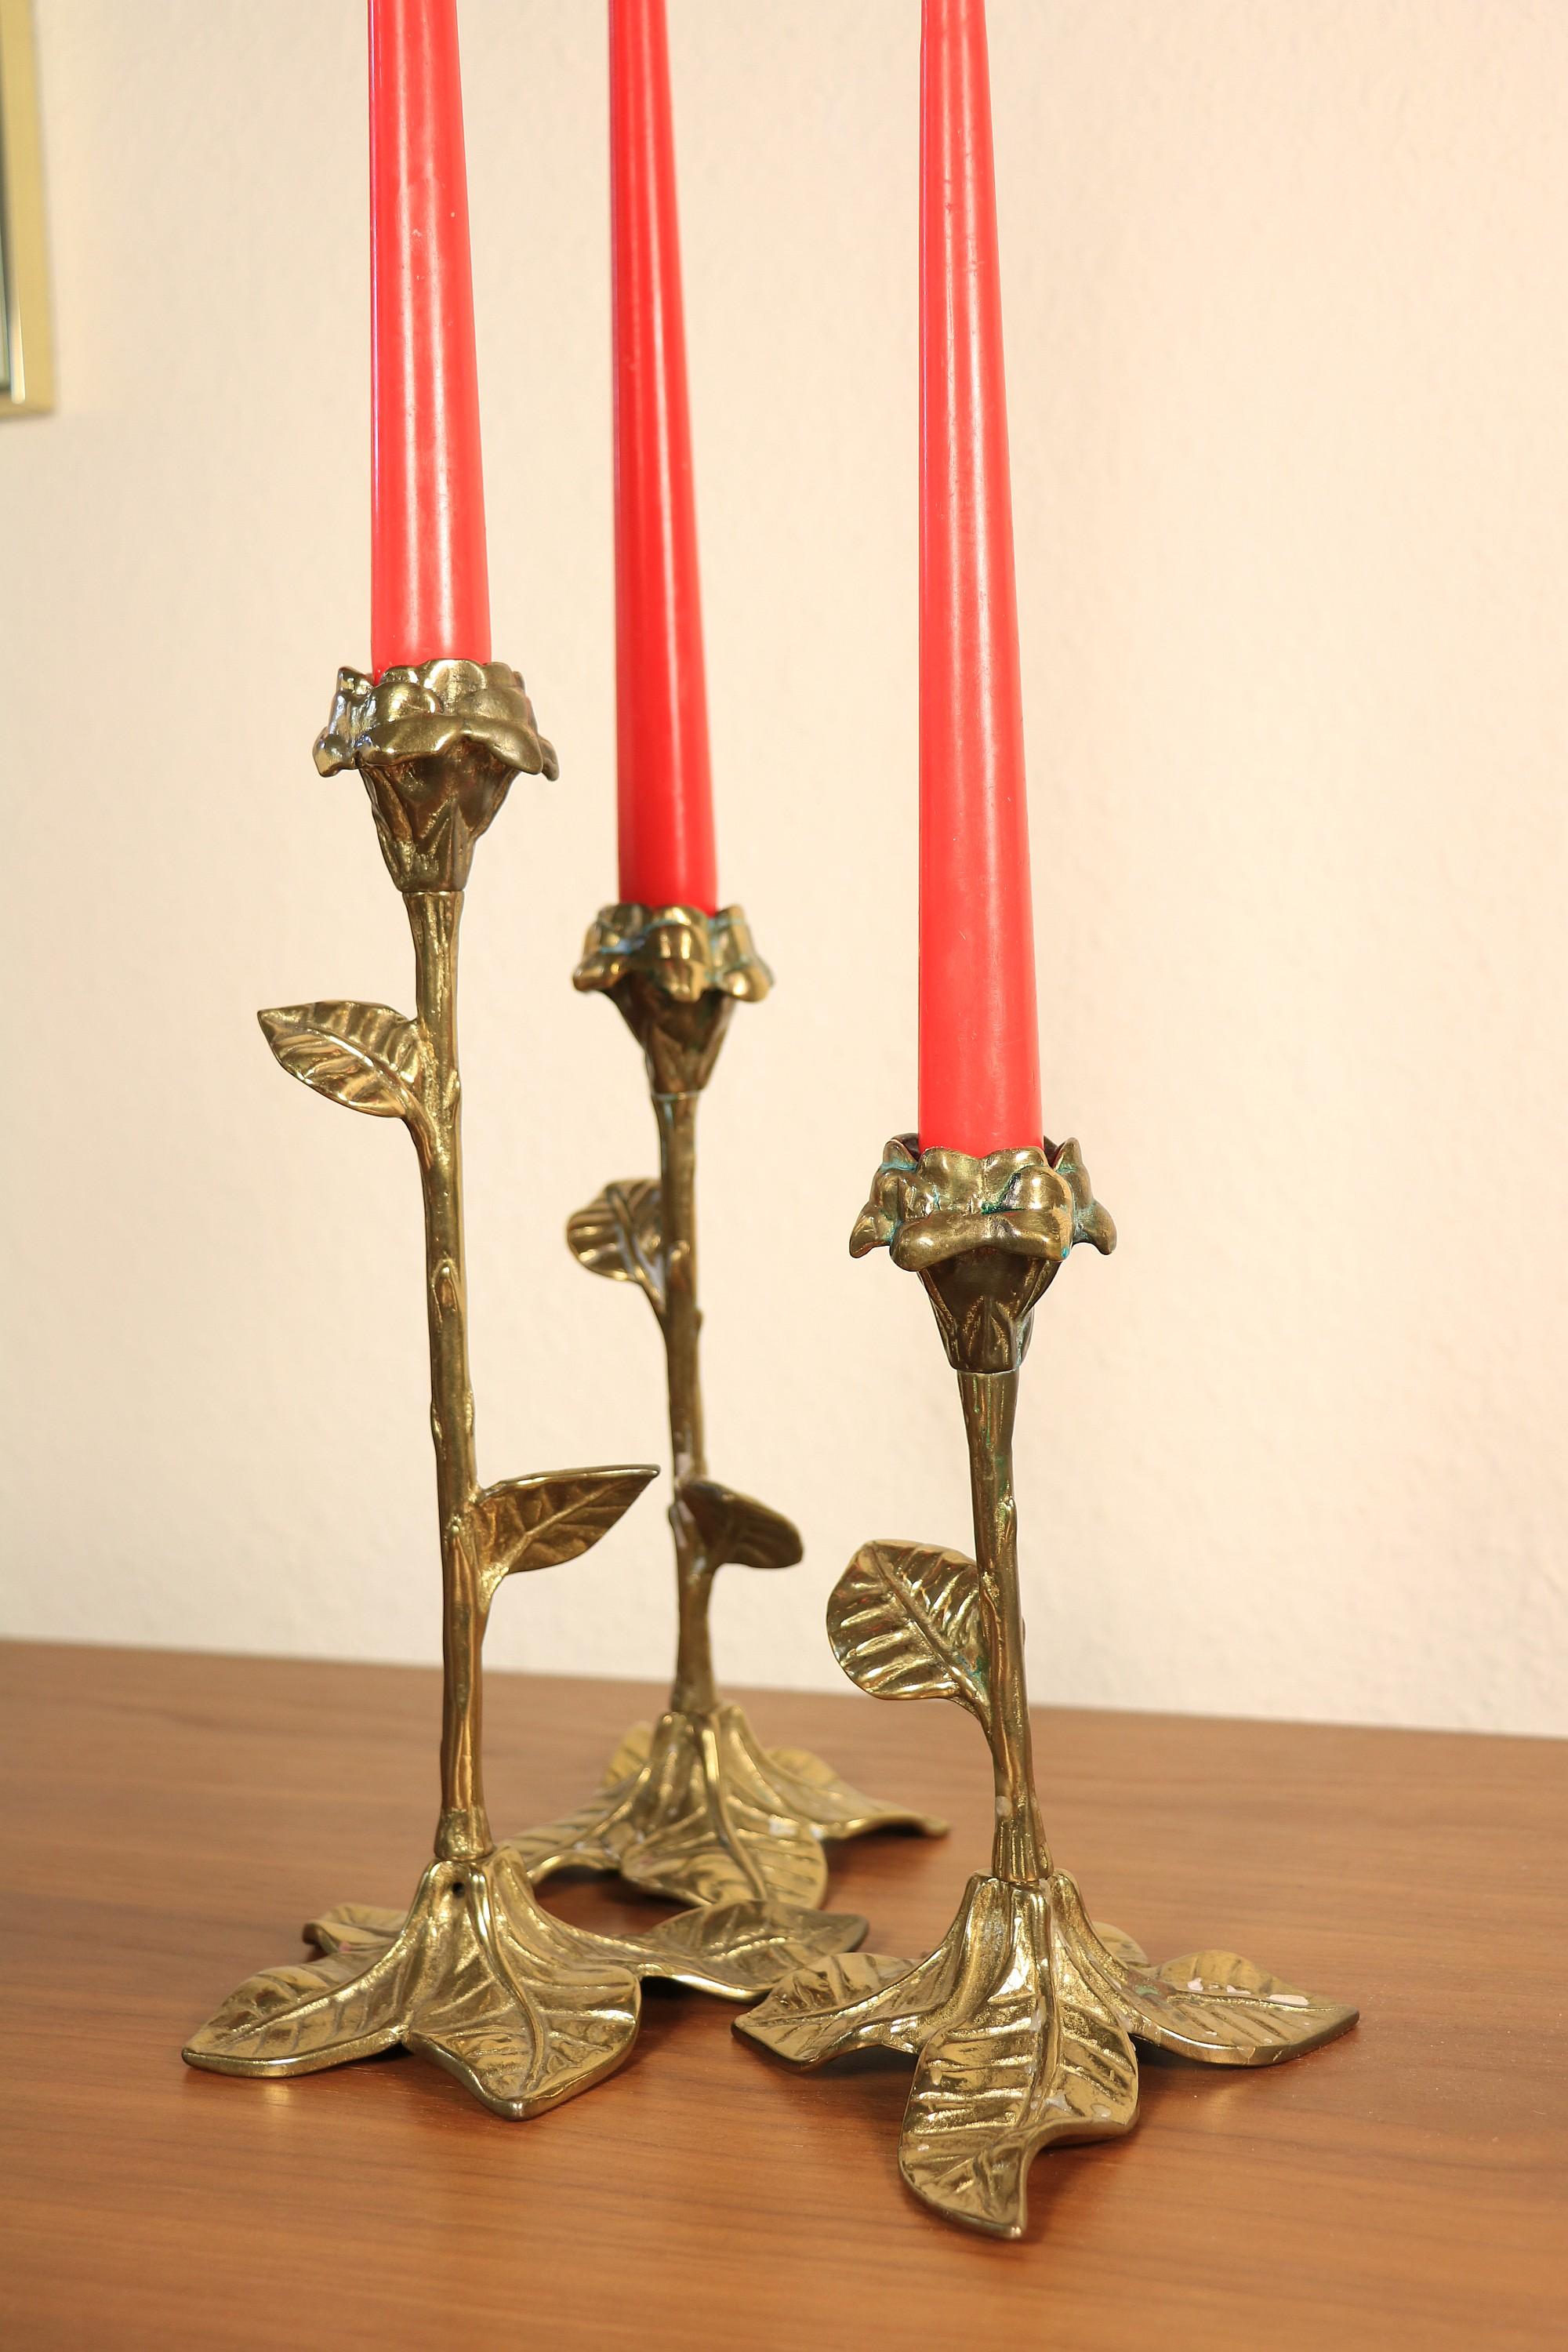 Late 20th Century Set of 3 Floral Candlesticks, Hollywood Regency Style, Brass, 1970s